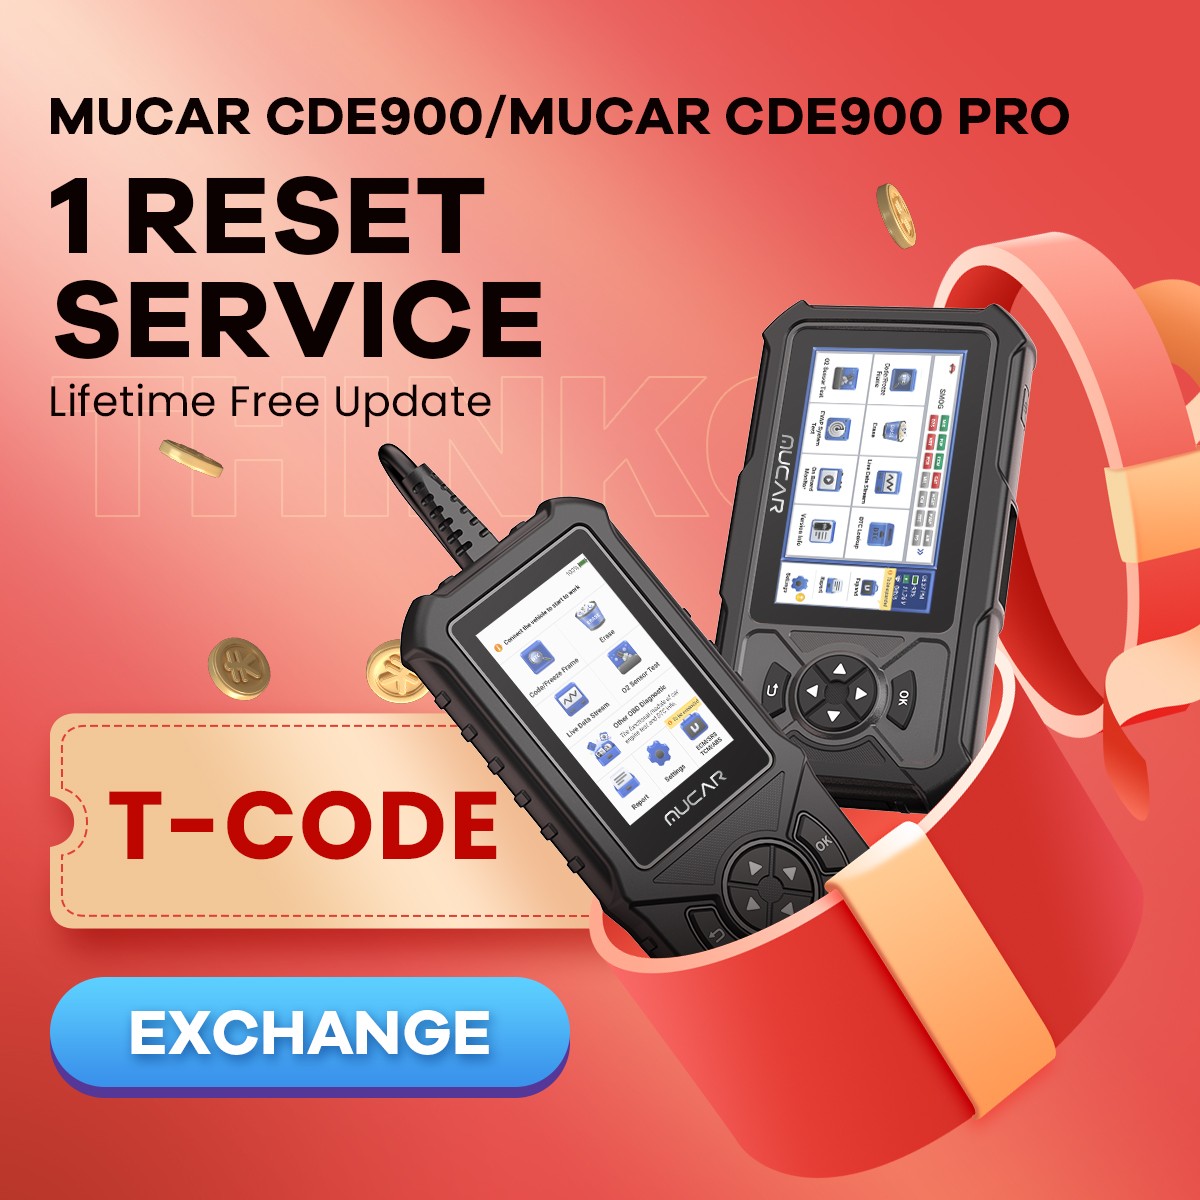 MUCAR CDE900/CDE900 PRO T-CODE 1 REST FUNCTION